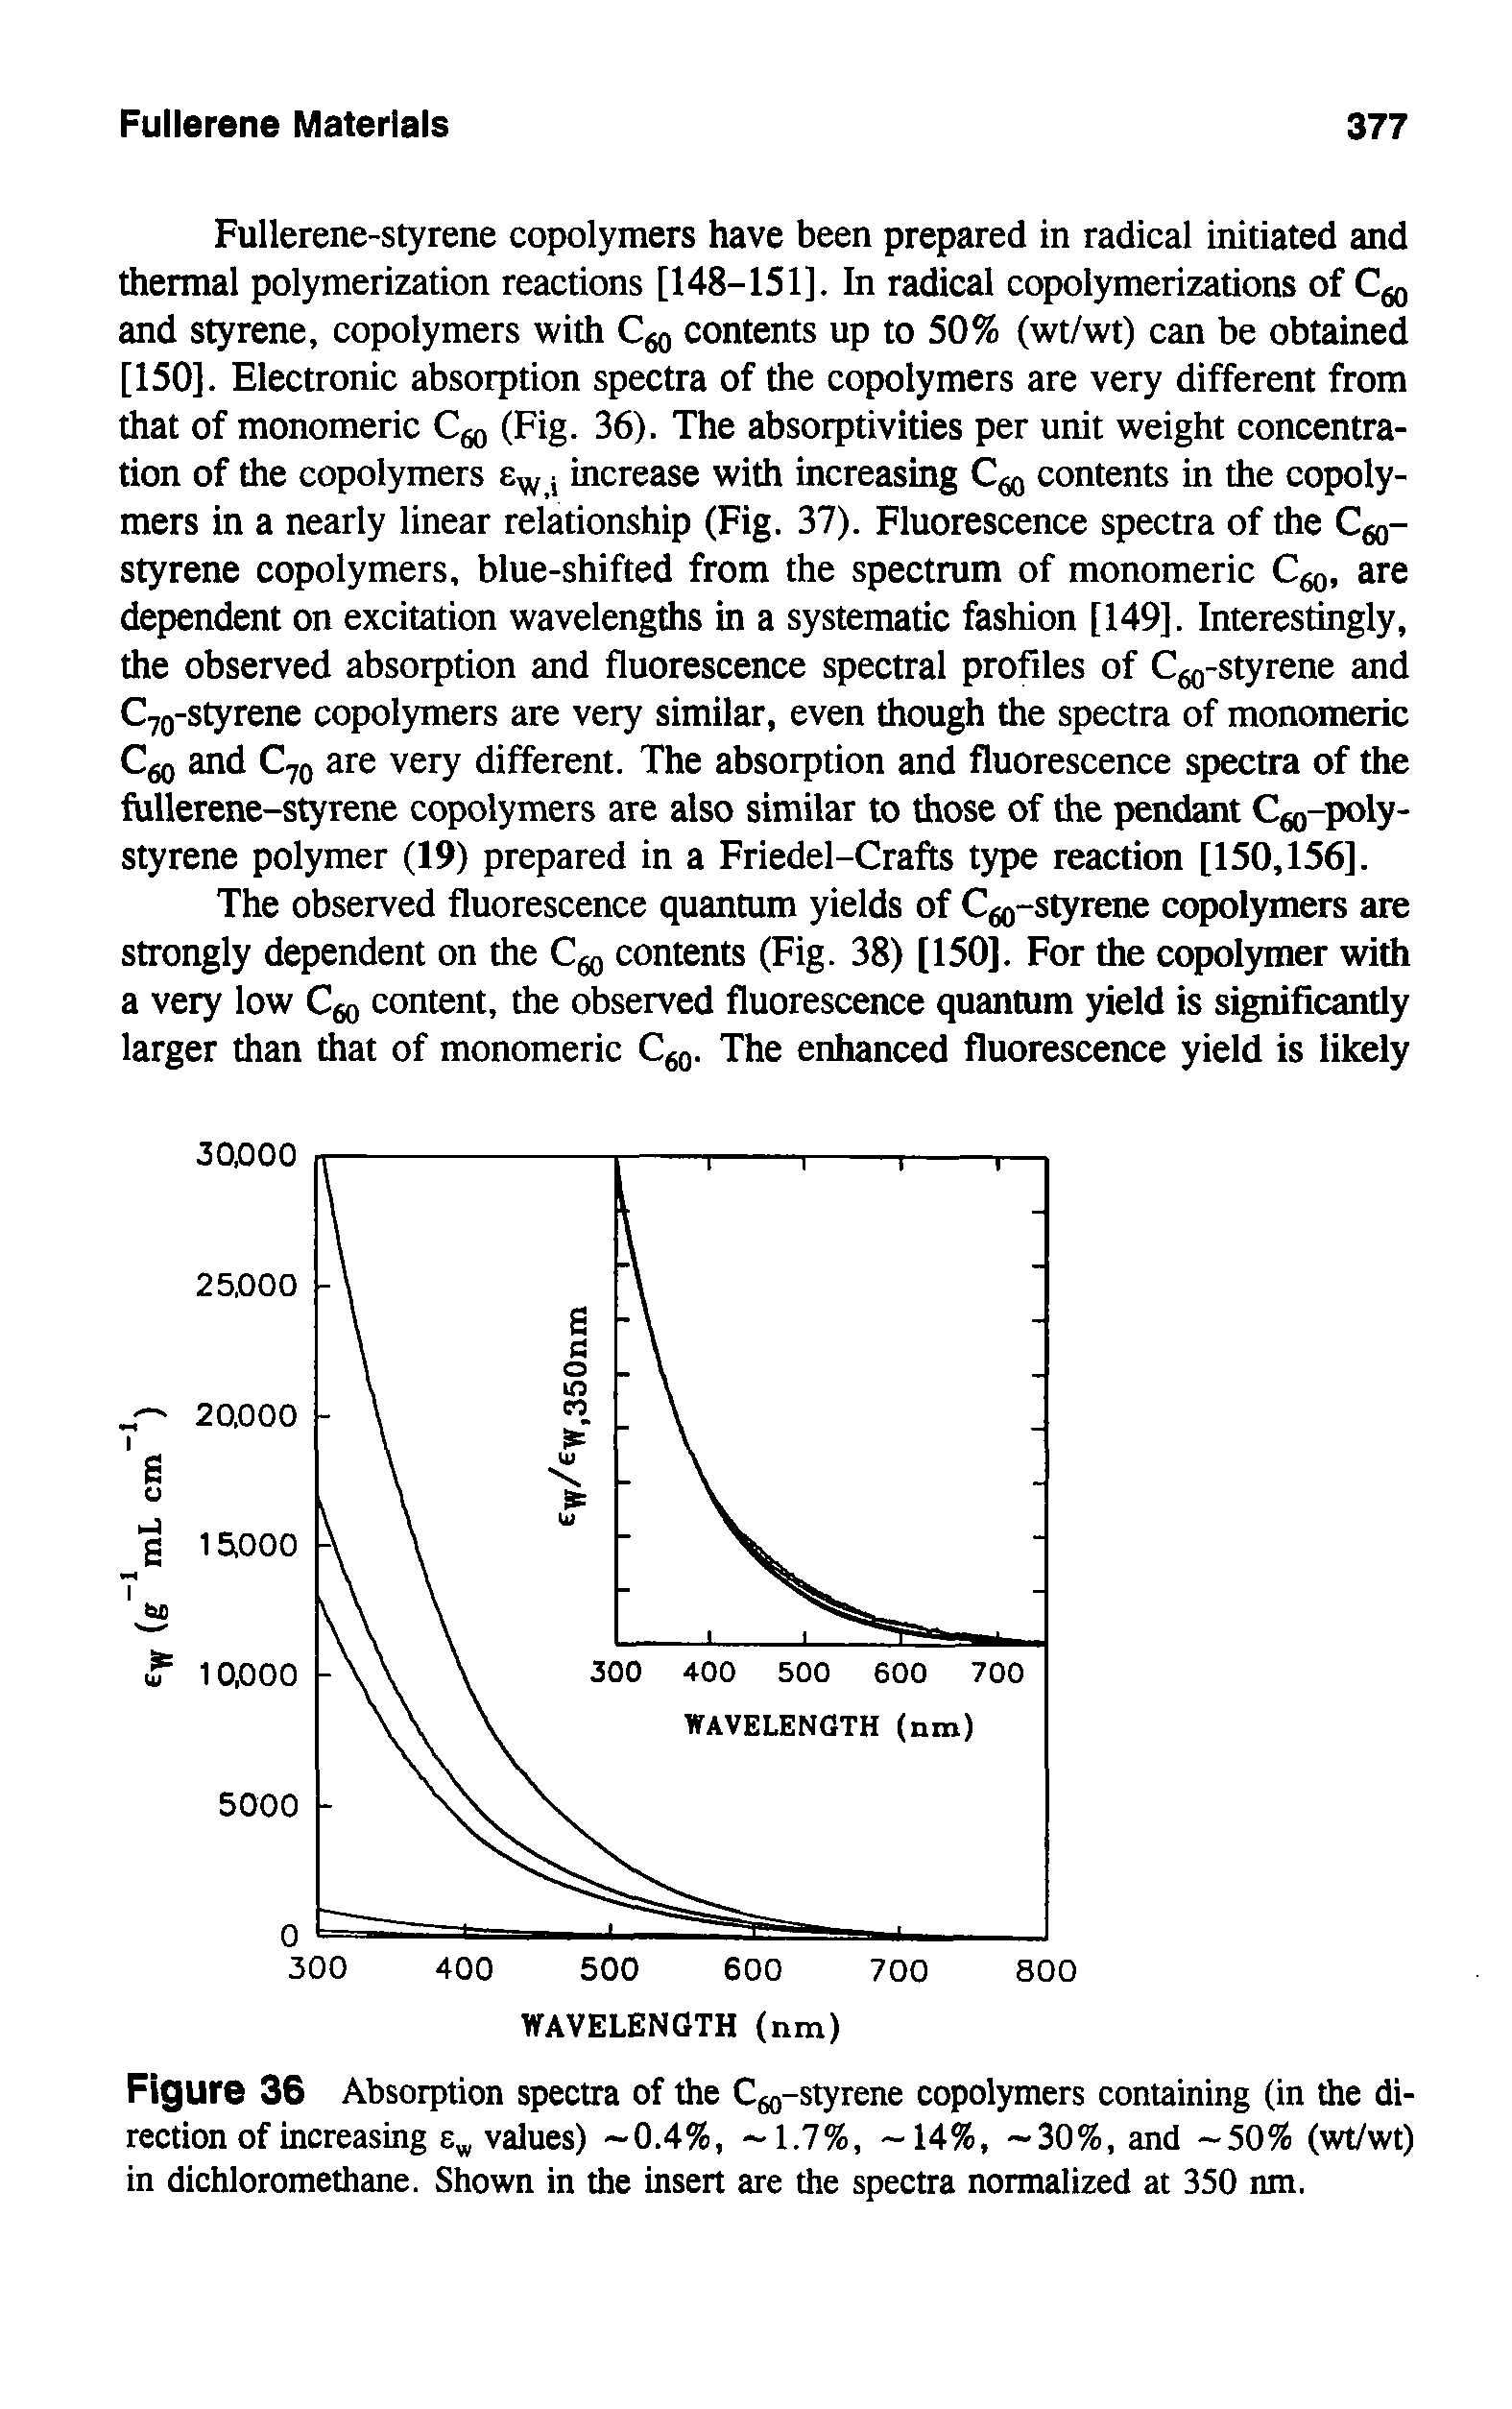 Figure 36 Absorption spectra of the C g-styrene copolymers containing (in the direction of increasing e values) 0.4%, 1.7%, -14%, -30%, and -50% (wt/wt) in dichloromethane. Shown in the insert are the spectra normalized at 350 nm.